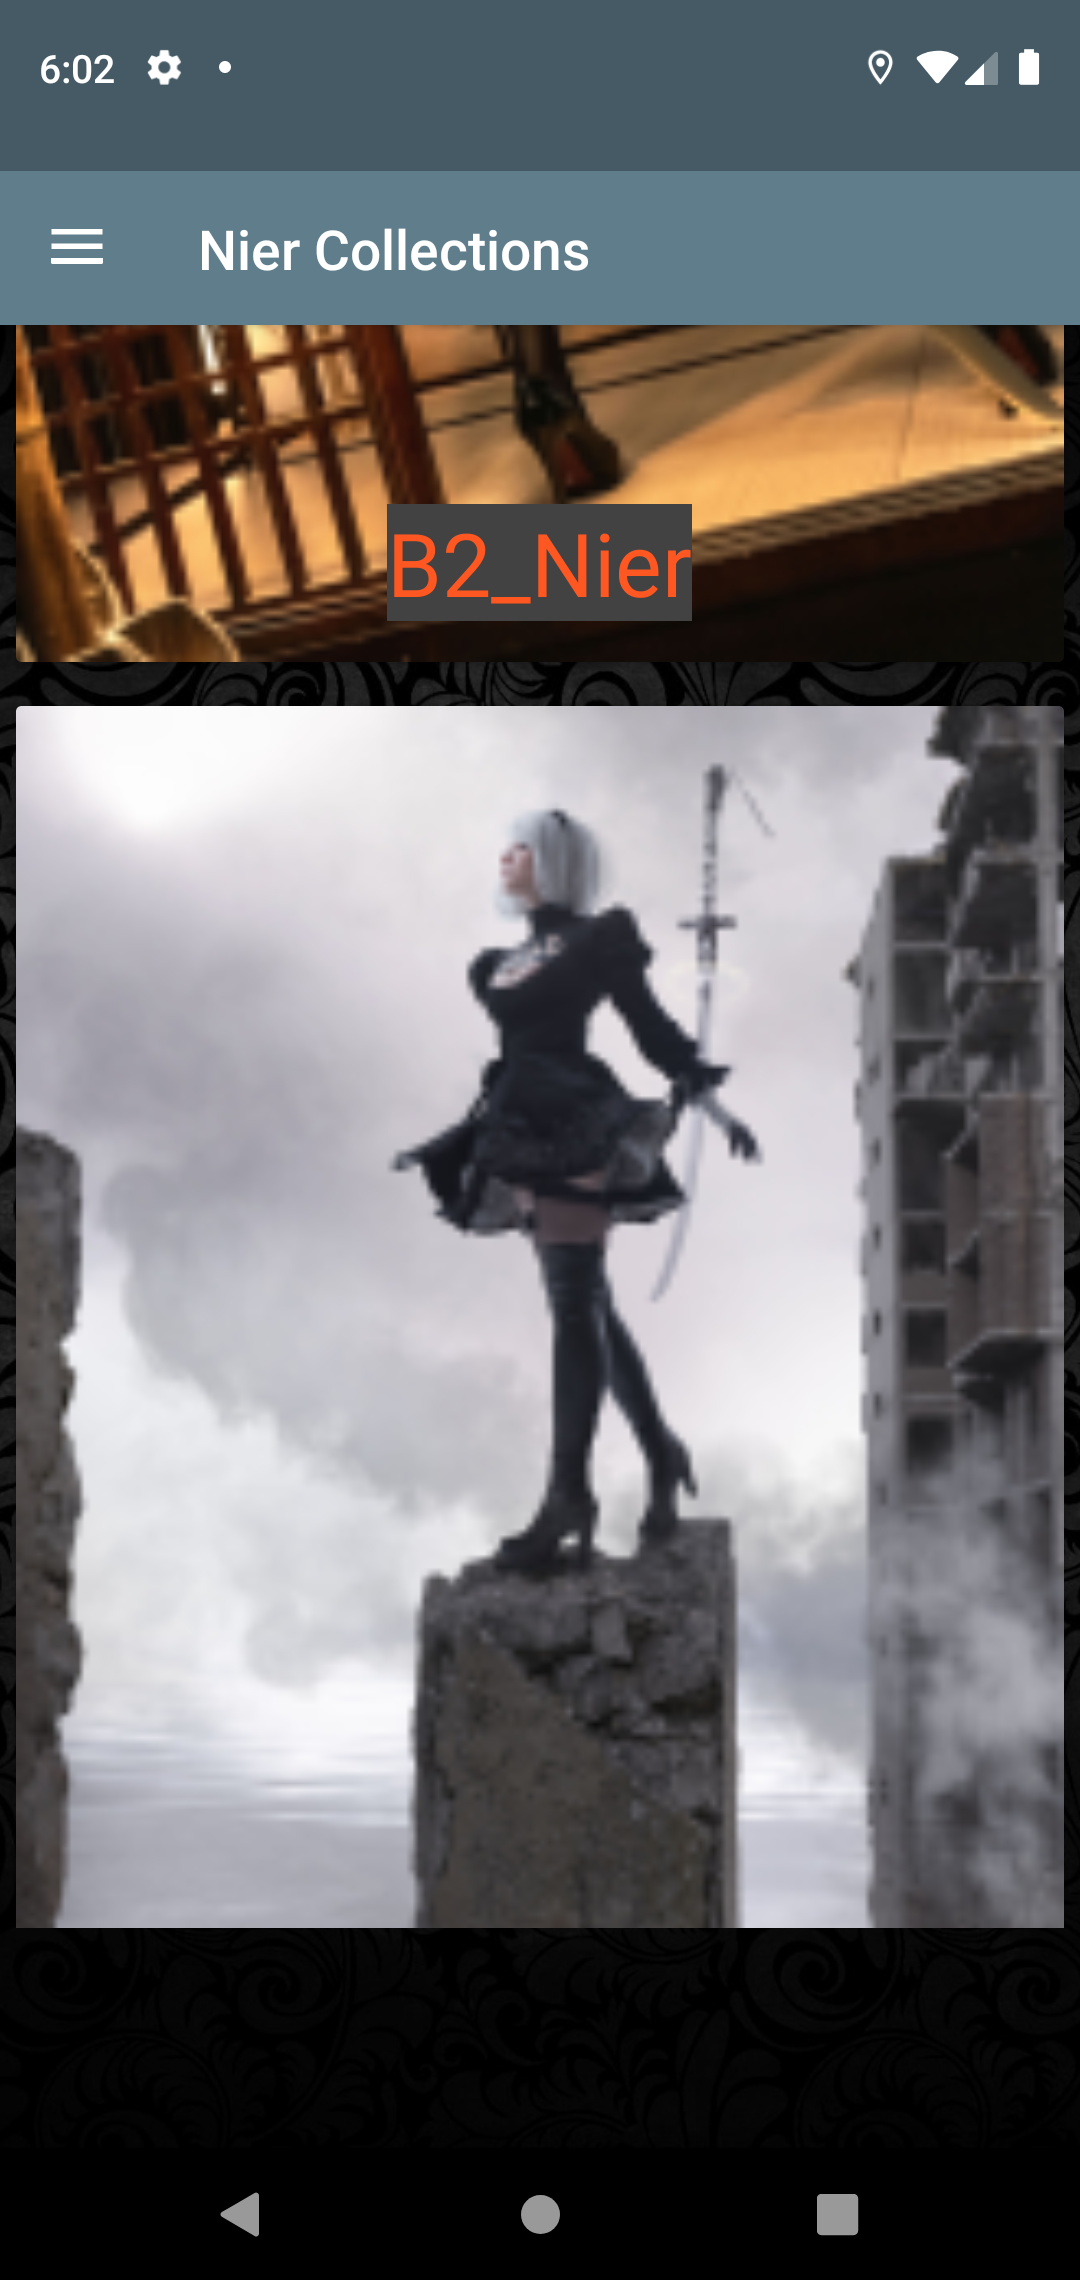 Nier Pictures big,wallpaper,hentail,nier,comics,erotic,wallpapers,download,pic,porn,hentai,pics,app,manga,apps,tanlines,galleries,sexy,image,apk,ass,adult,gallery,android,pictures